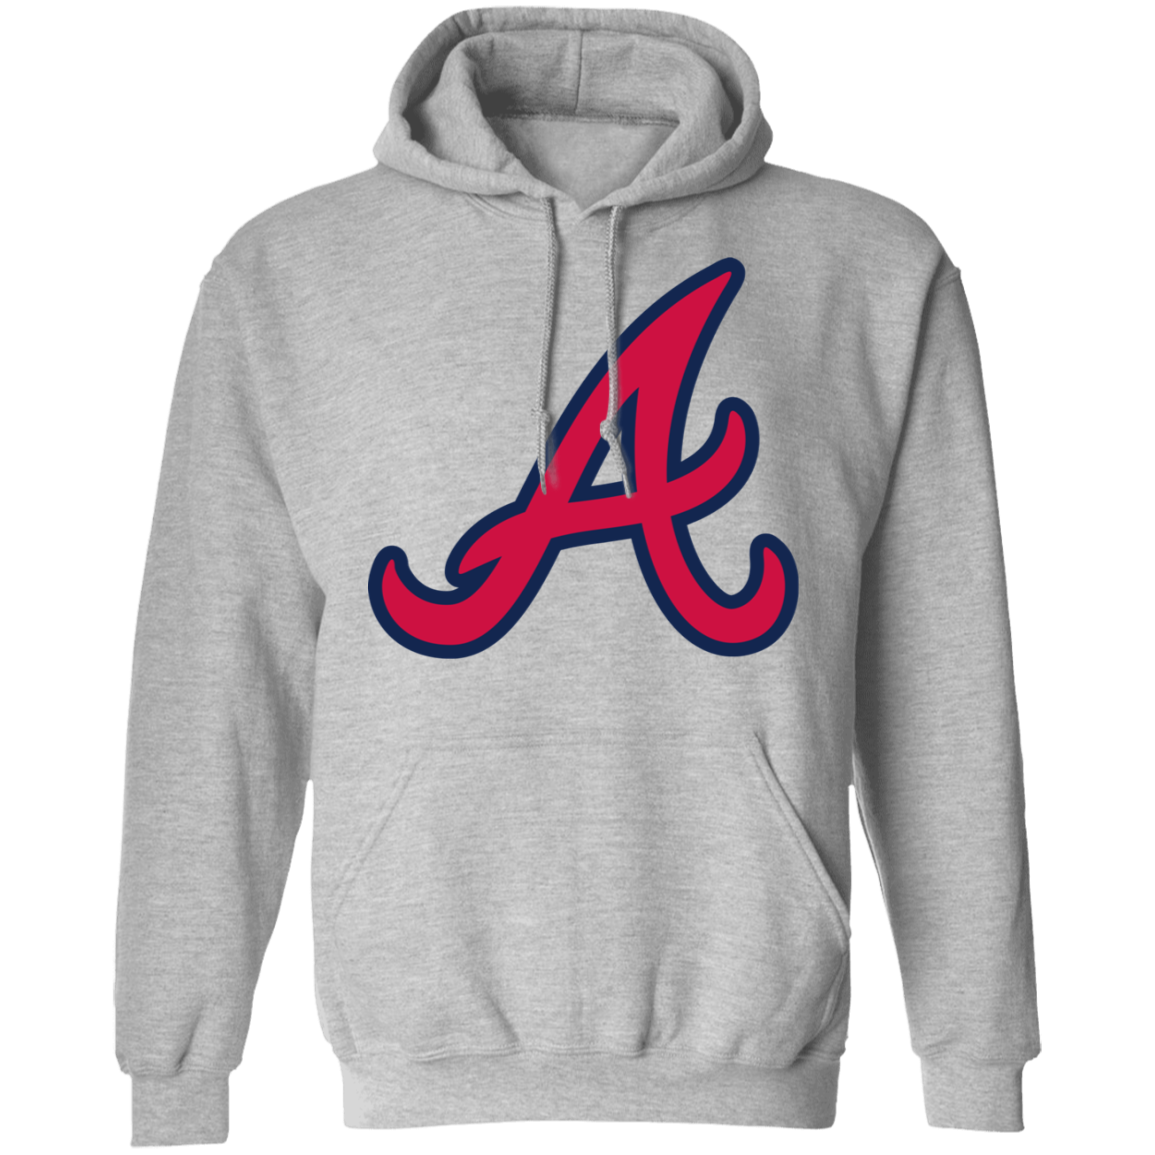 Atlanta Braves Red Letters Sweatshirt Size XL - $45 (43% Off Retail) - From  Hannah